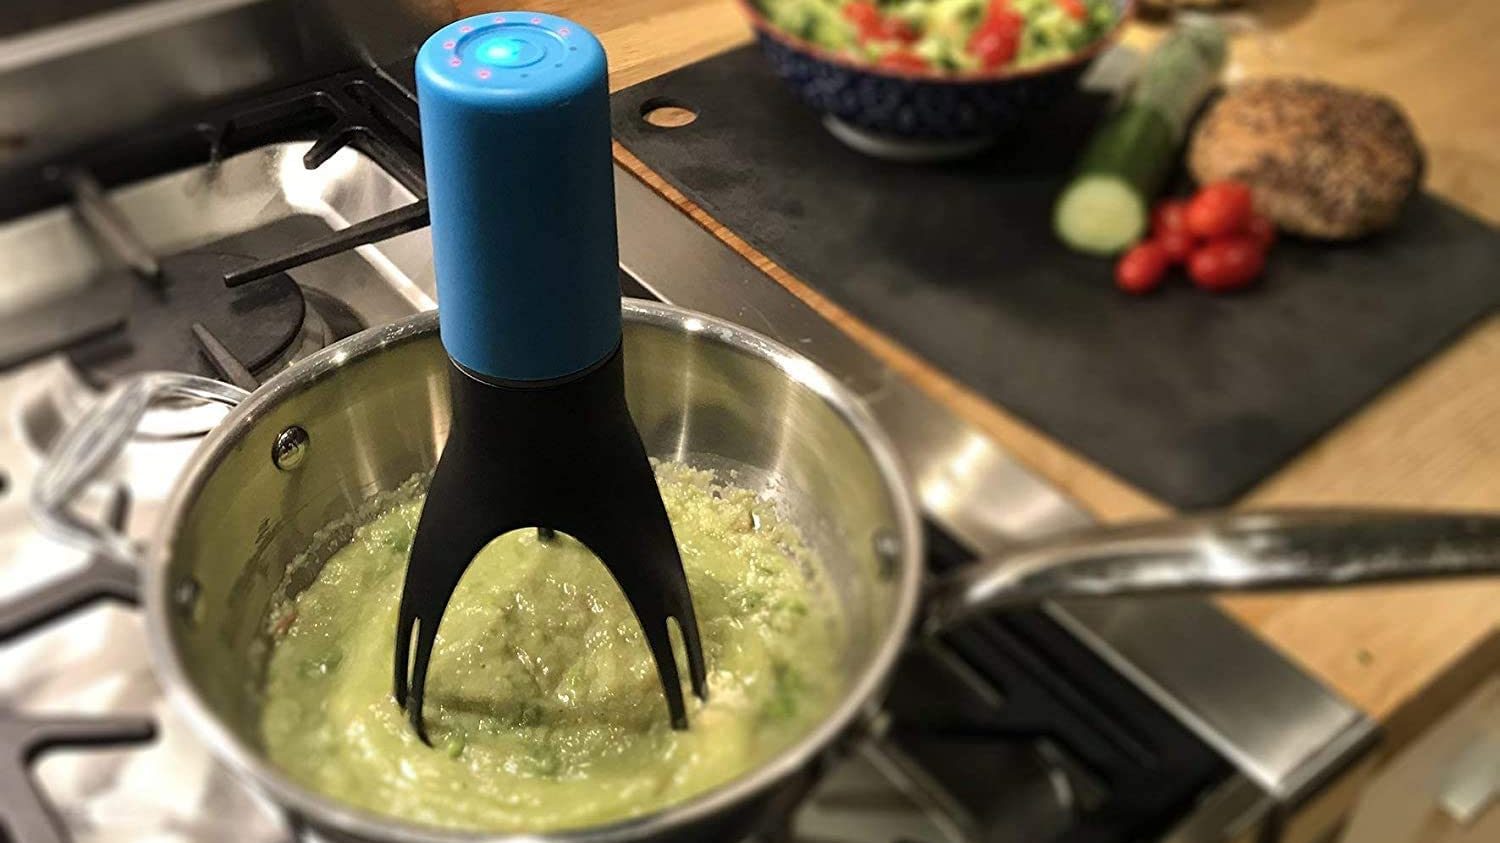 Automatic Pan Stirrer Why Every Home Cook Needs? - dealzoneshub-com